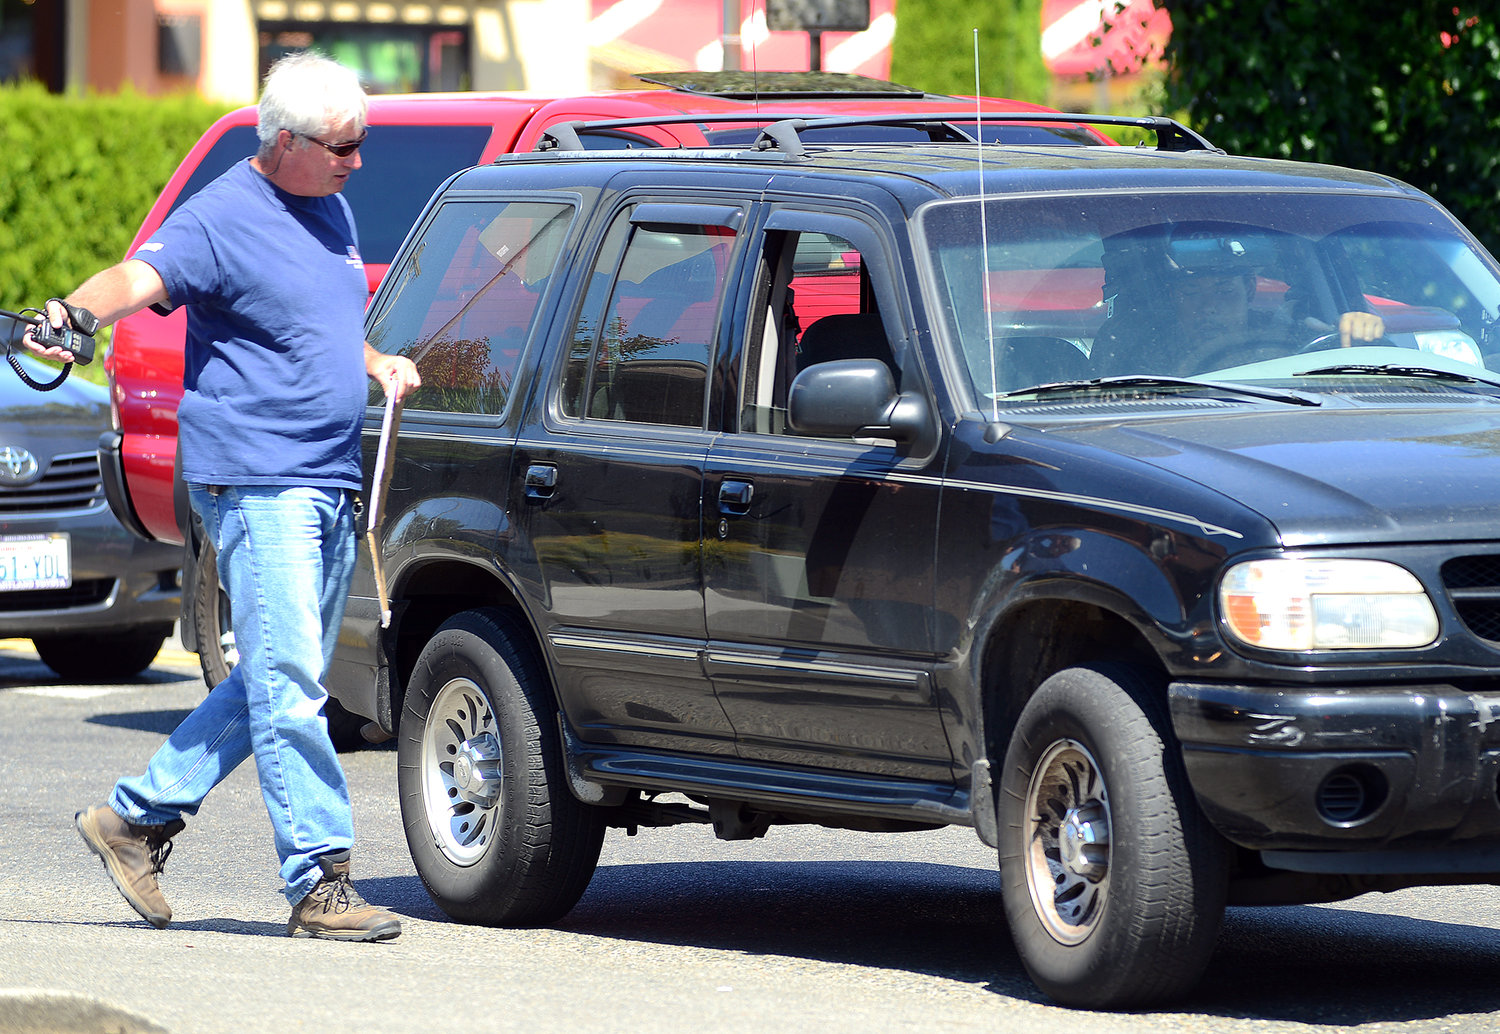 FILE PHOTO — While holding a sign that reads "Police Cell Phone Emphasis in Progress," former Centralia Police Sgt. Jim Shannon walks up to a driver talking on his cell phone while parked at a red light on Bellmont Avenue in Centralia in August 2013.